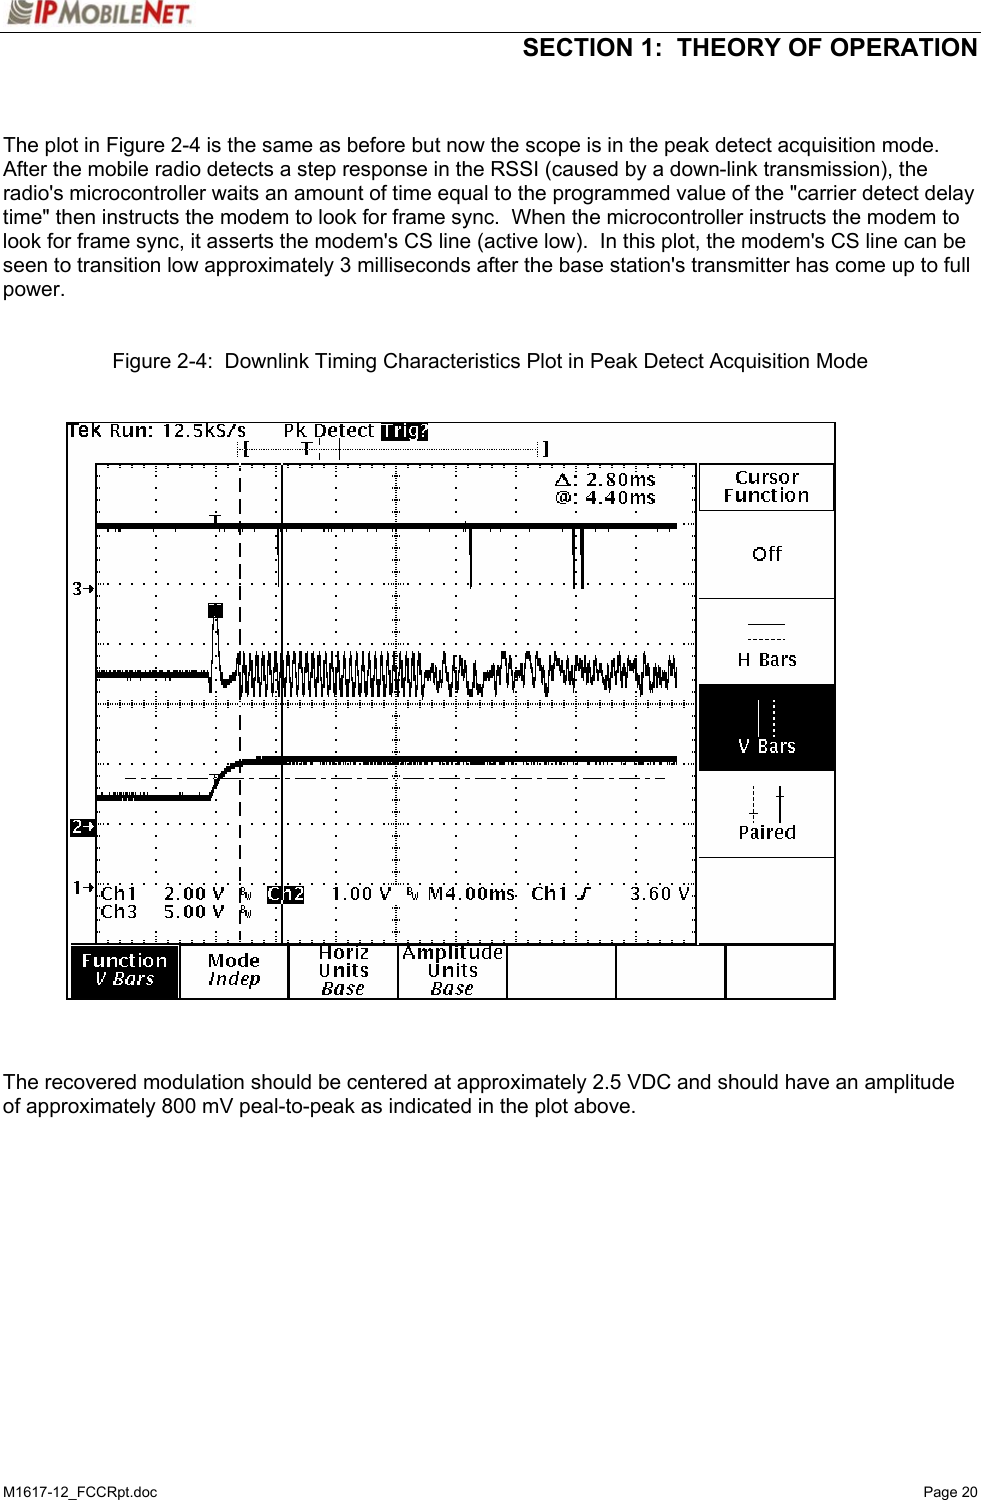  SECTION 1:  THEORY OF OPERATION  M1617-12_FCCRpt.doc   Page 20   The plot in Figure 2-4 is the same as before but now the scope is in the peak detect acquisition mode.  After the mobile radio detects a step response in the RSSI (caused by a down-link transmission), the radio&apos;s microcontroller waits an amount of time equal to the programmed value of the &quot;carrier detect delay time&quot; then instructs the modem to look for frame sync.  When the microcontroller instructs the modem to look for frame sync, it asserts the modem&apos;s CS line (active low).  In this plot, the modem&apos;s CS line can be seen to transition low approximately 3 milliseconds after the base station&apos;s transmitter has come up to full power.    Figure 2-4:  Downlink Timing Characteristics Plot in Peak Detect Acquisition Mode      The recovered modulation should be centered at approximately 2.5 VDC and should have an amplitude of approximately 800 mV peal-to-peak as indicated in the plot above.     